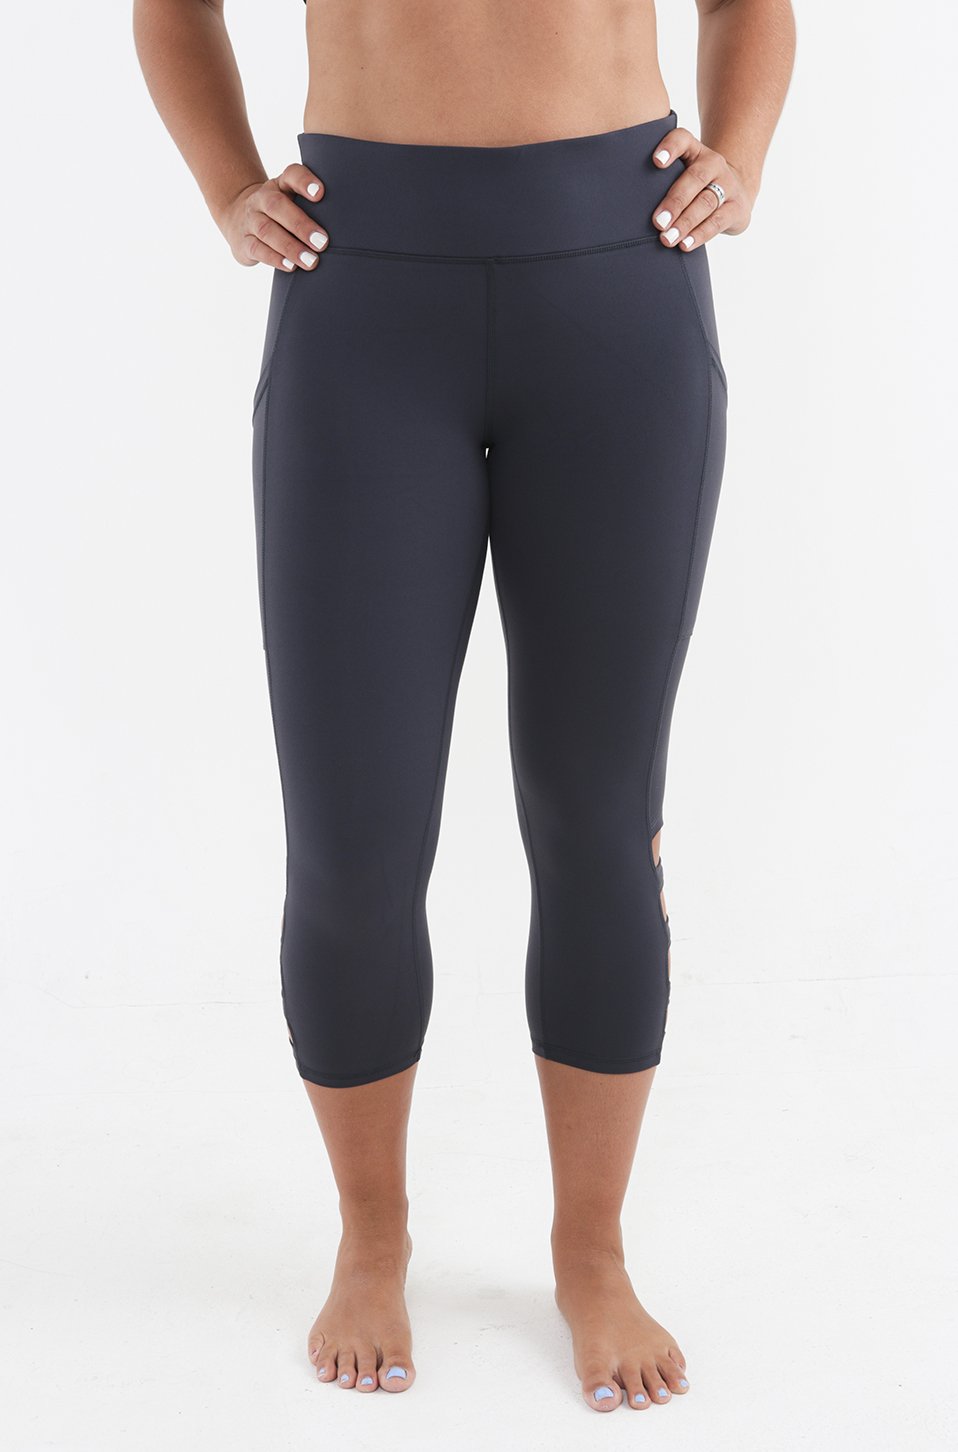 Lululemon All The Right Places Crop Yoga Pants (Black, 4) : Amazon.in:  Clothing & Accessories